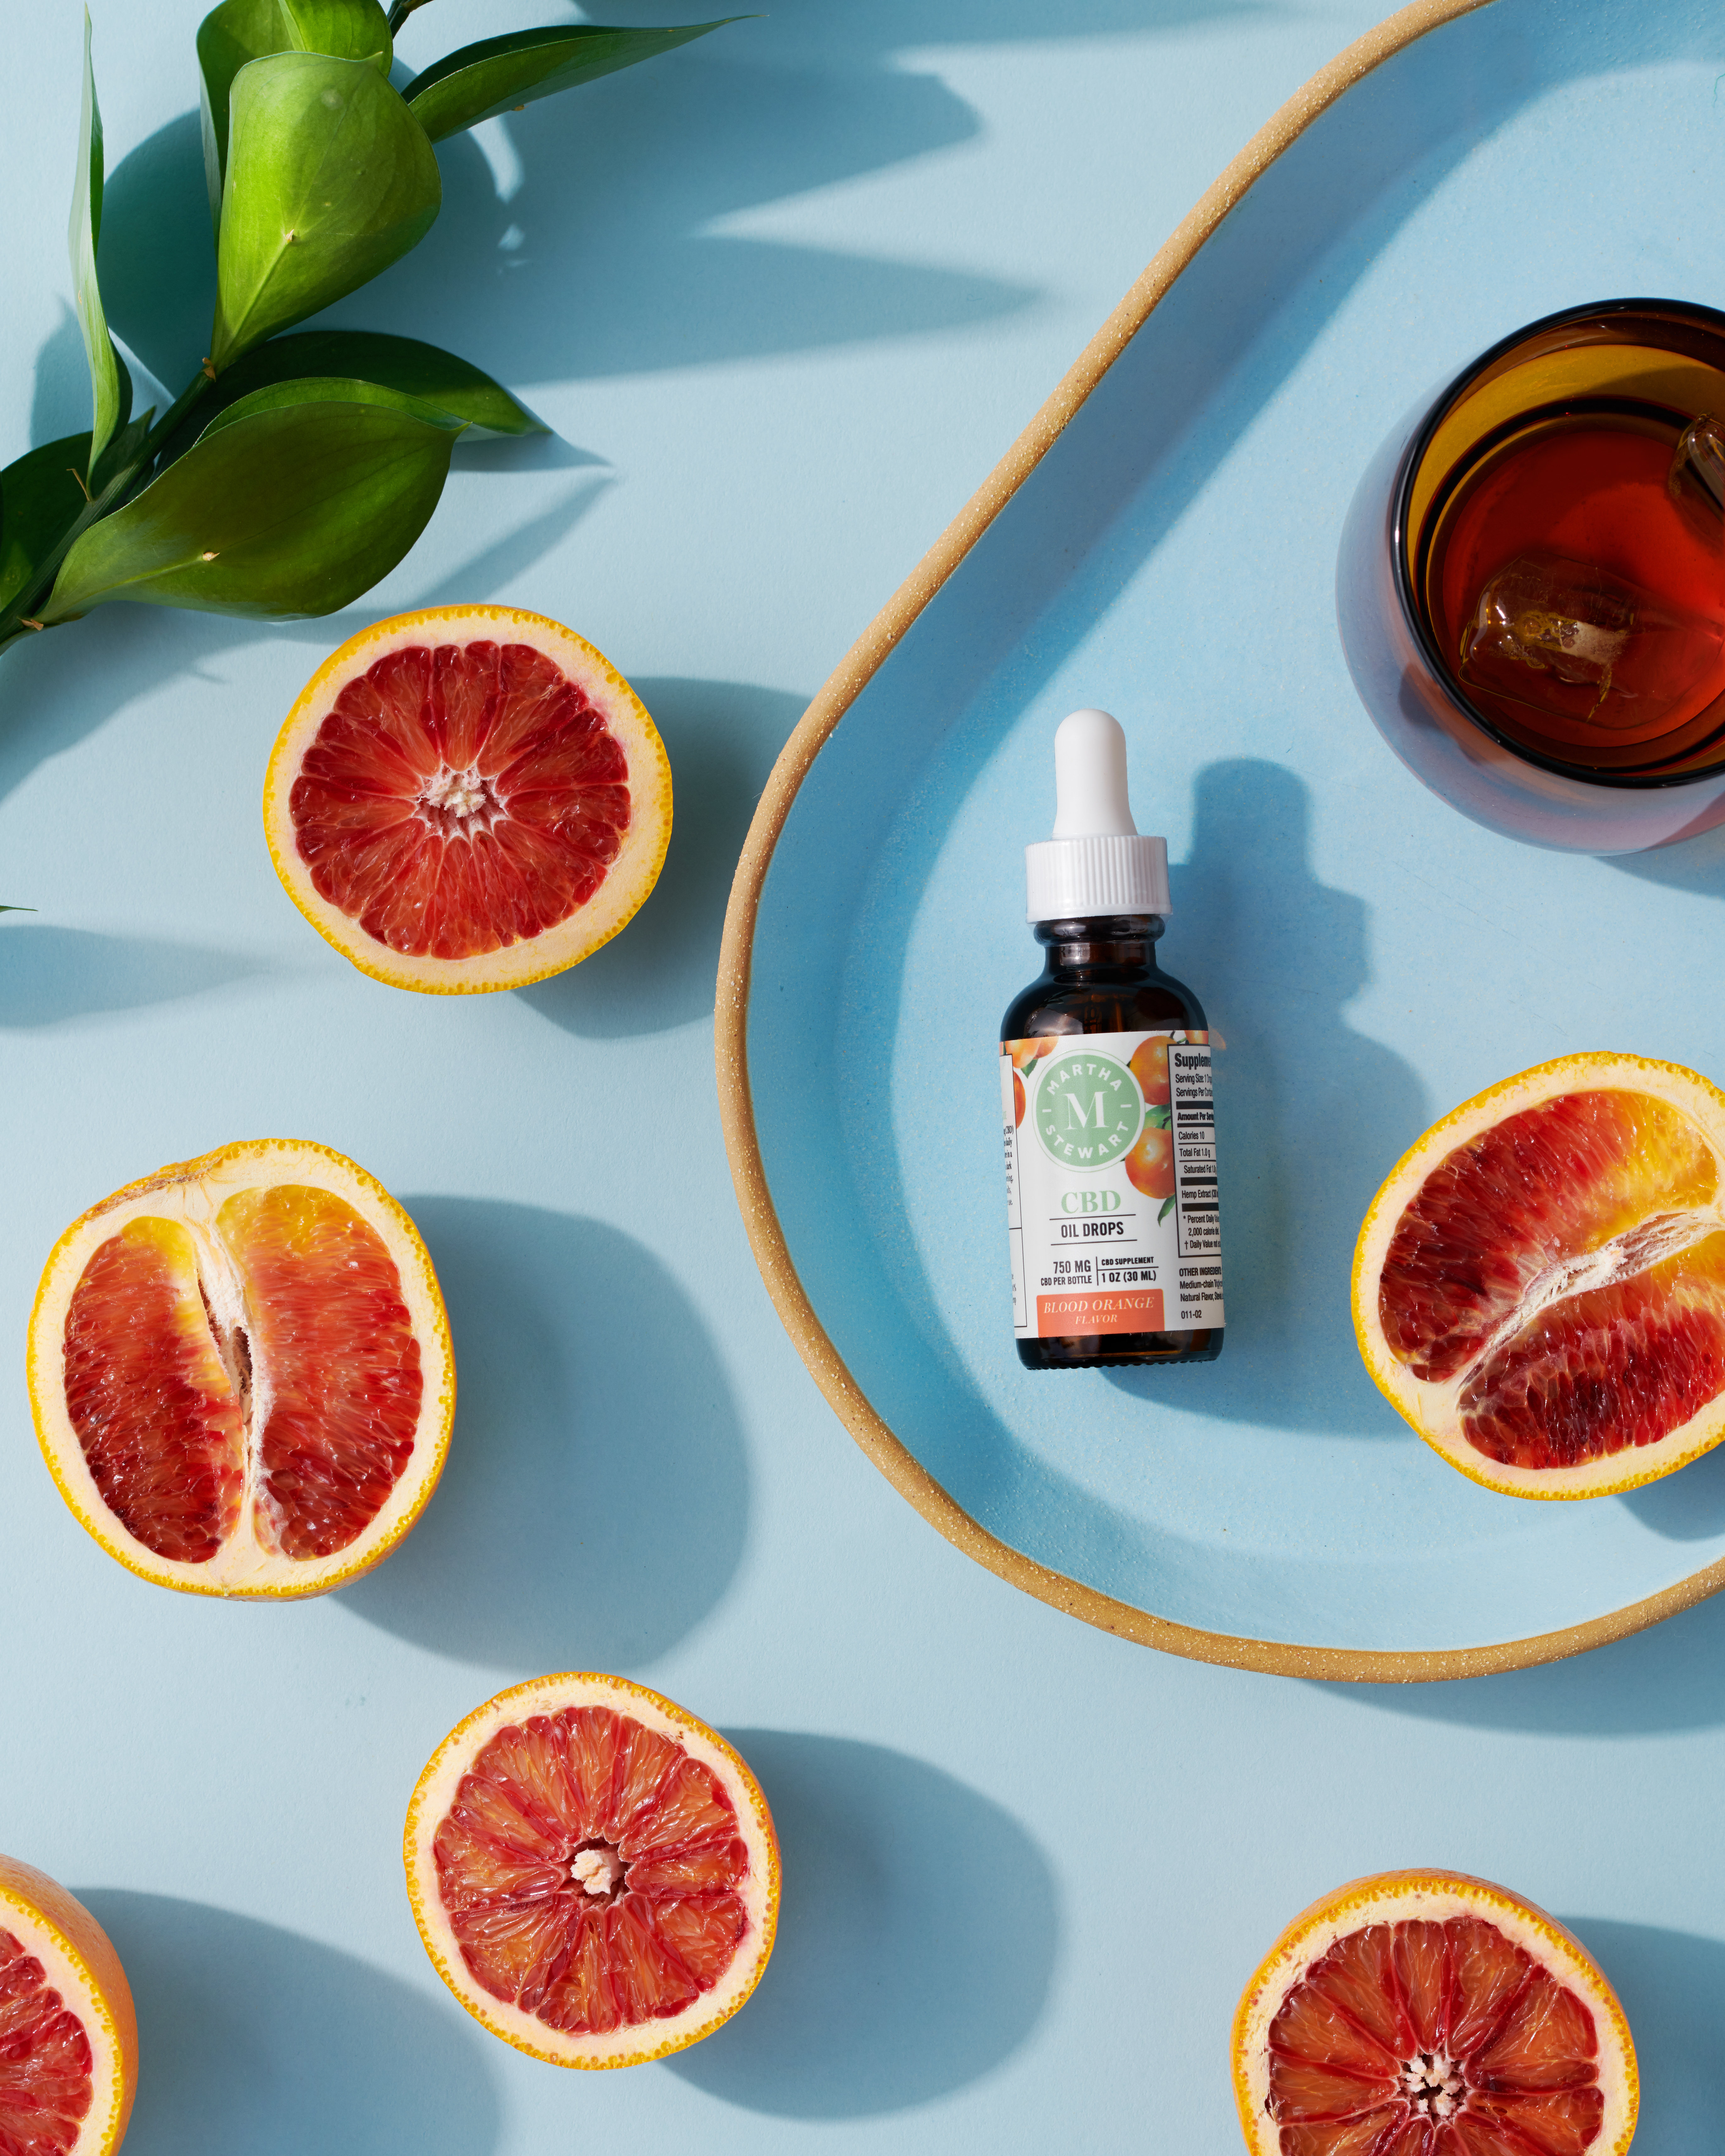 Martha Stewart CBD oil drops come in three flavor options. (Courtesy of Canopy Growth)